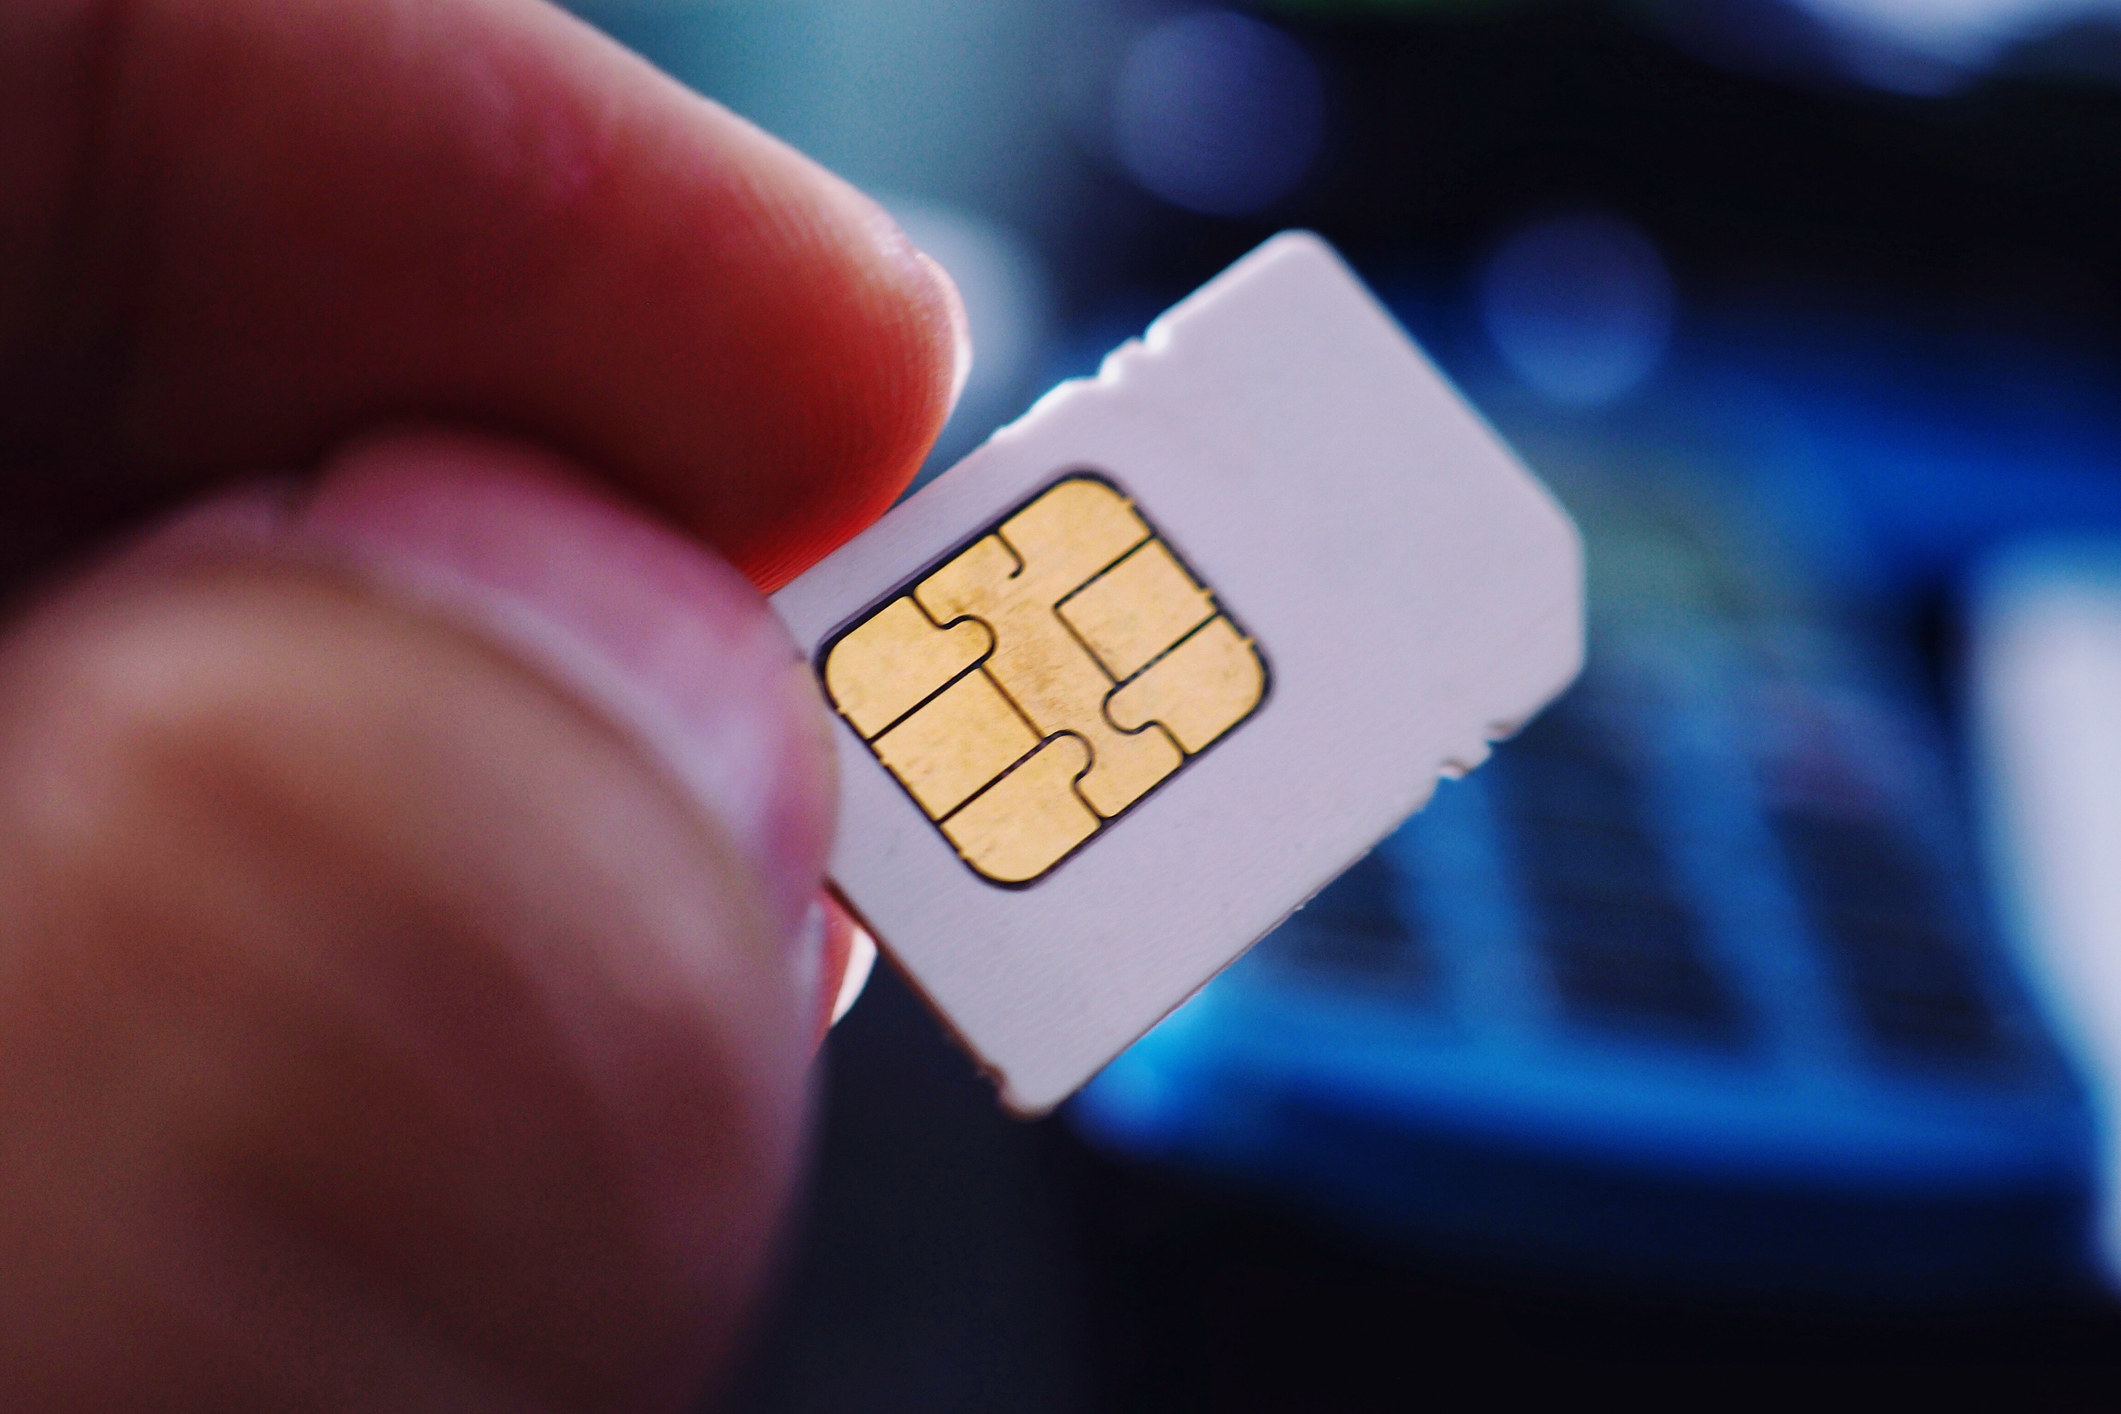 Someone holding a SIM card for a cellphone